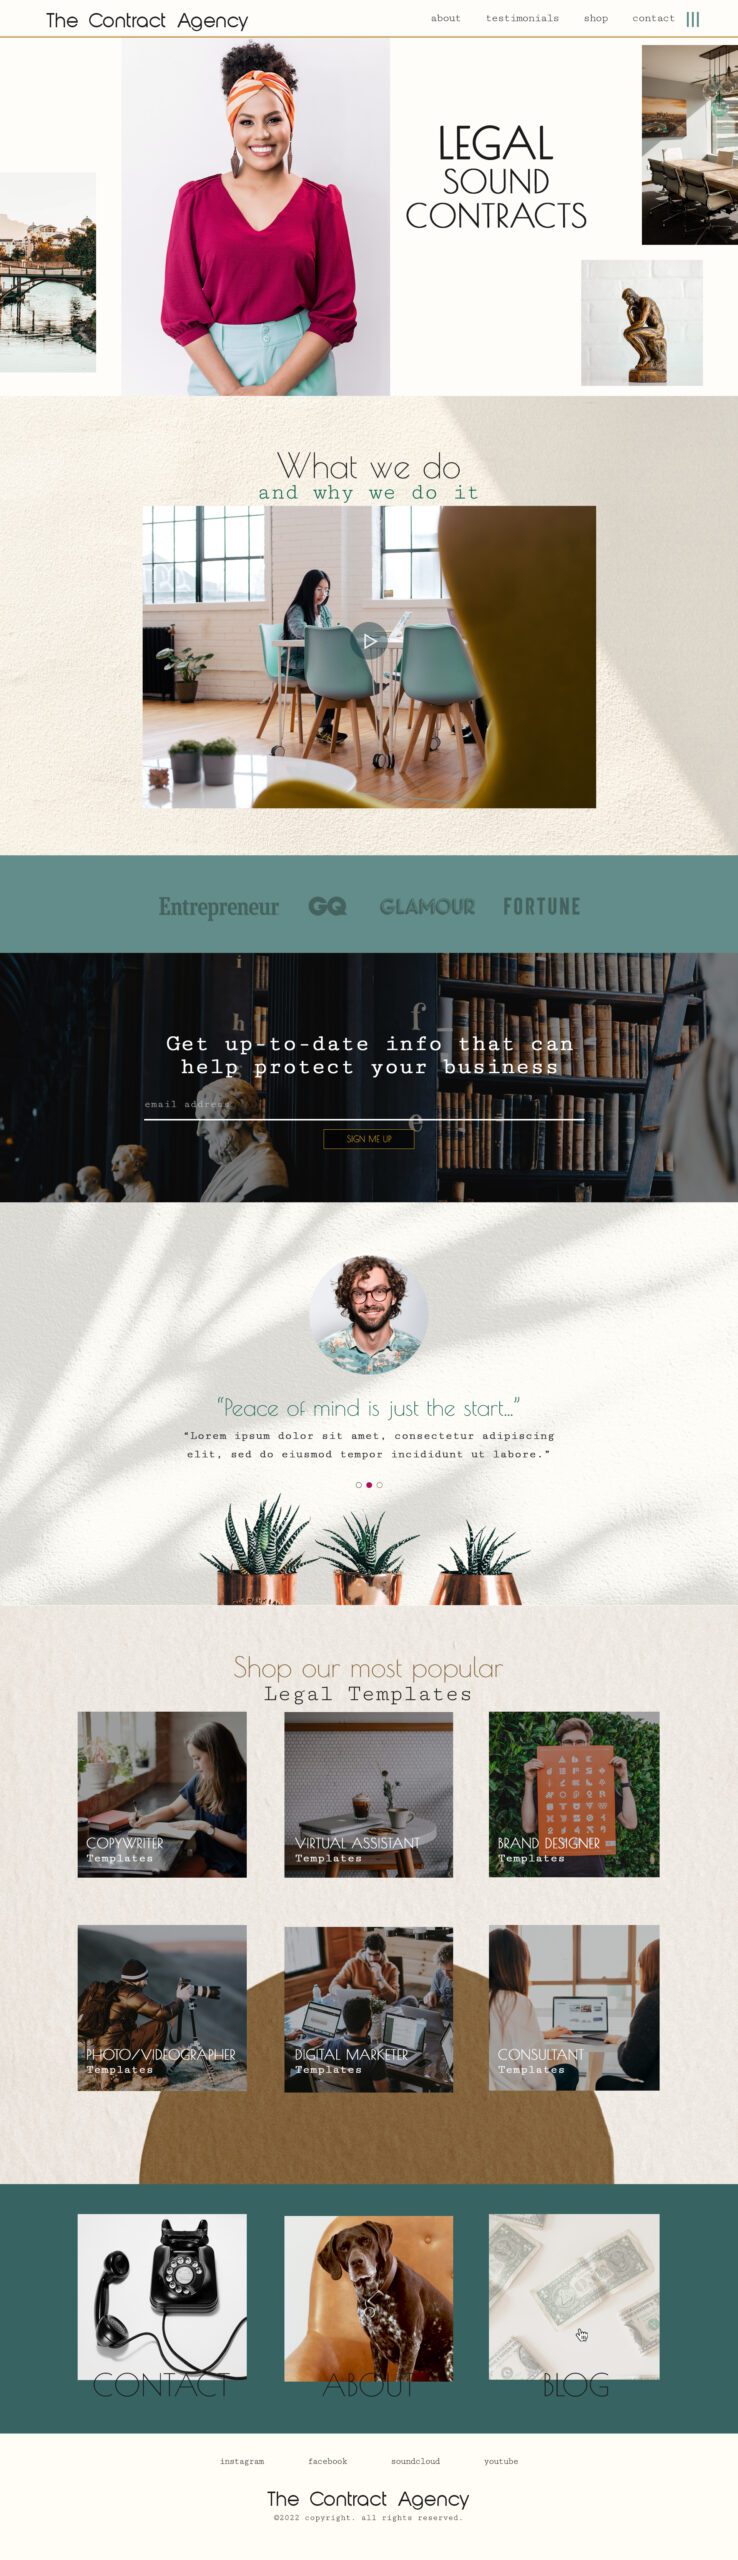 Digital Downloads Pro a WordPress Child theme built for the Genesis Framework. Featuring WooCommerce and Easy Digital Downloads integration.